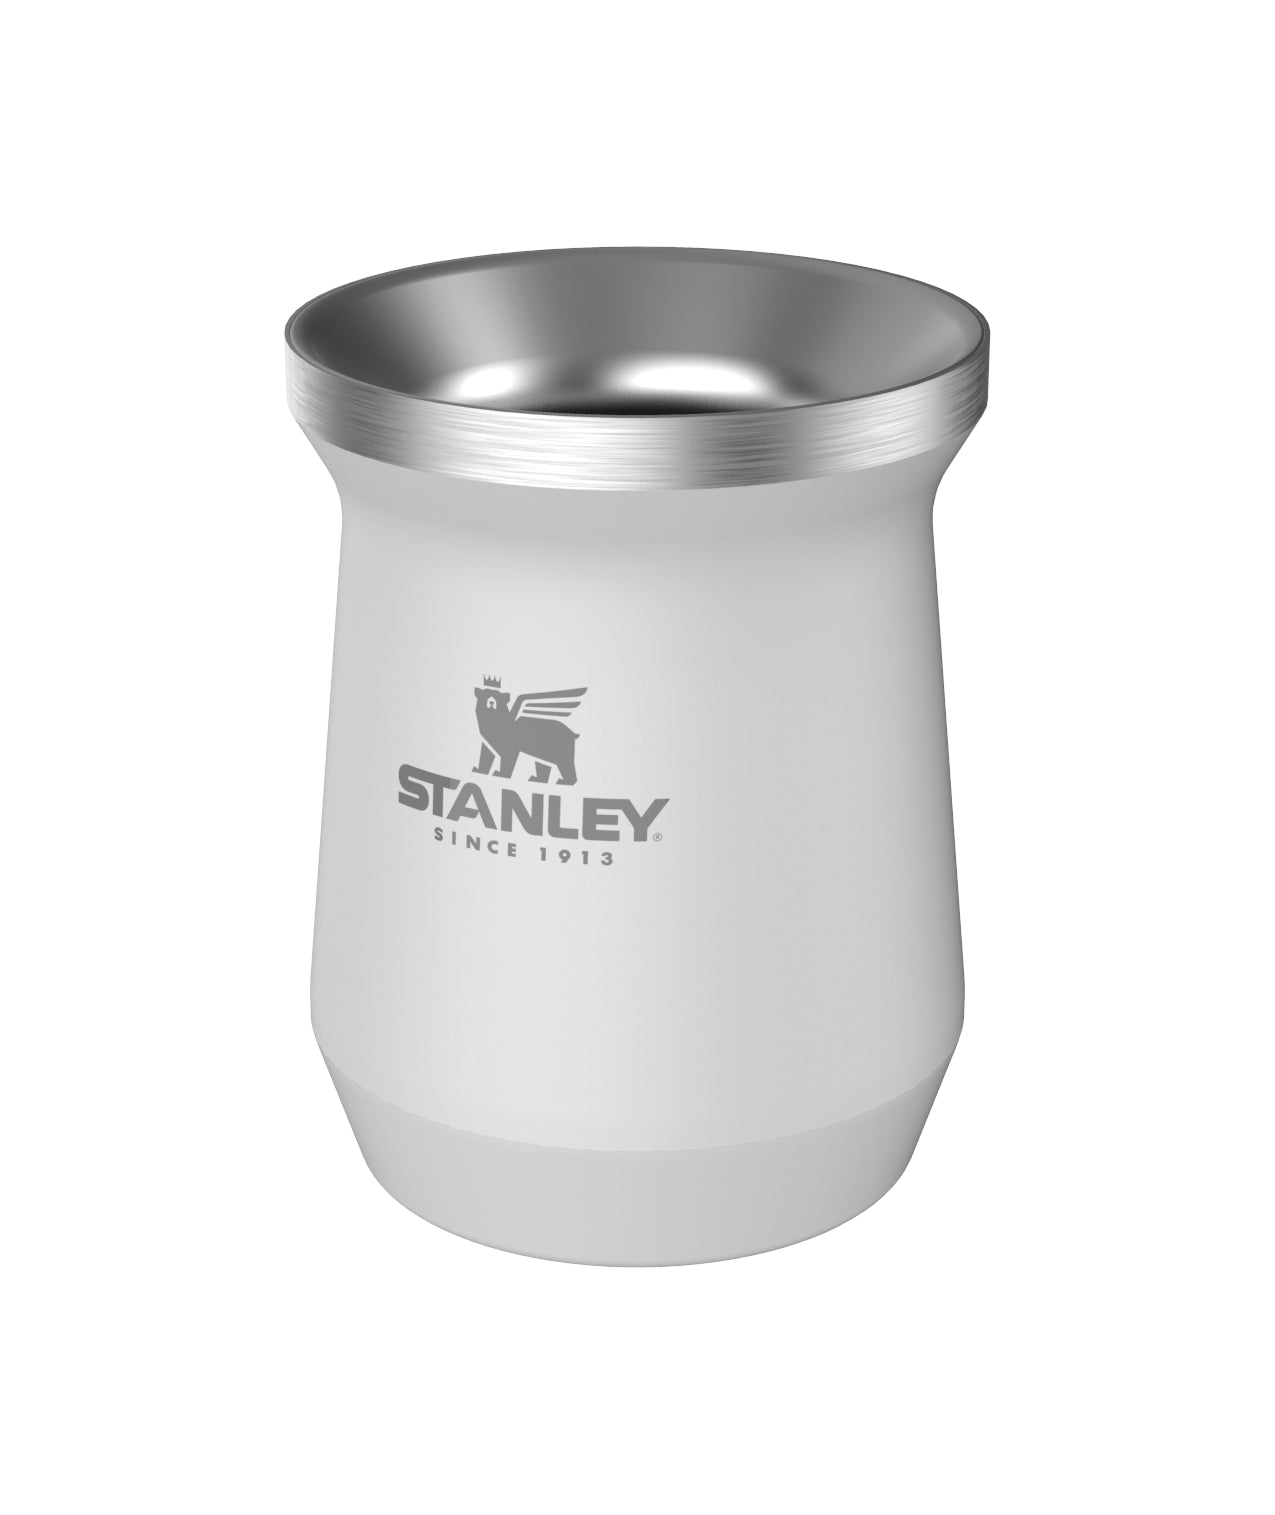 Mate Stanley Blanco 236 ml - Stanley Chile